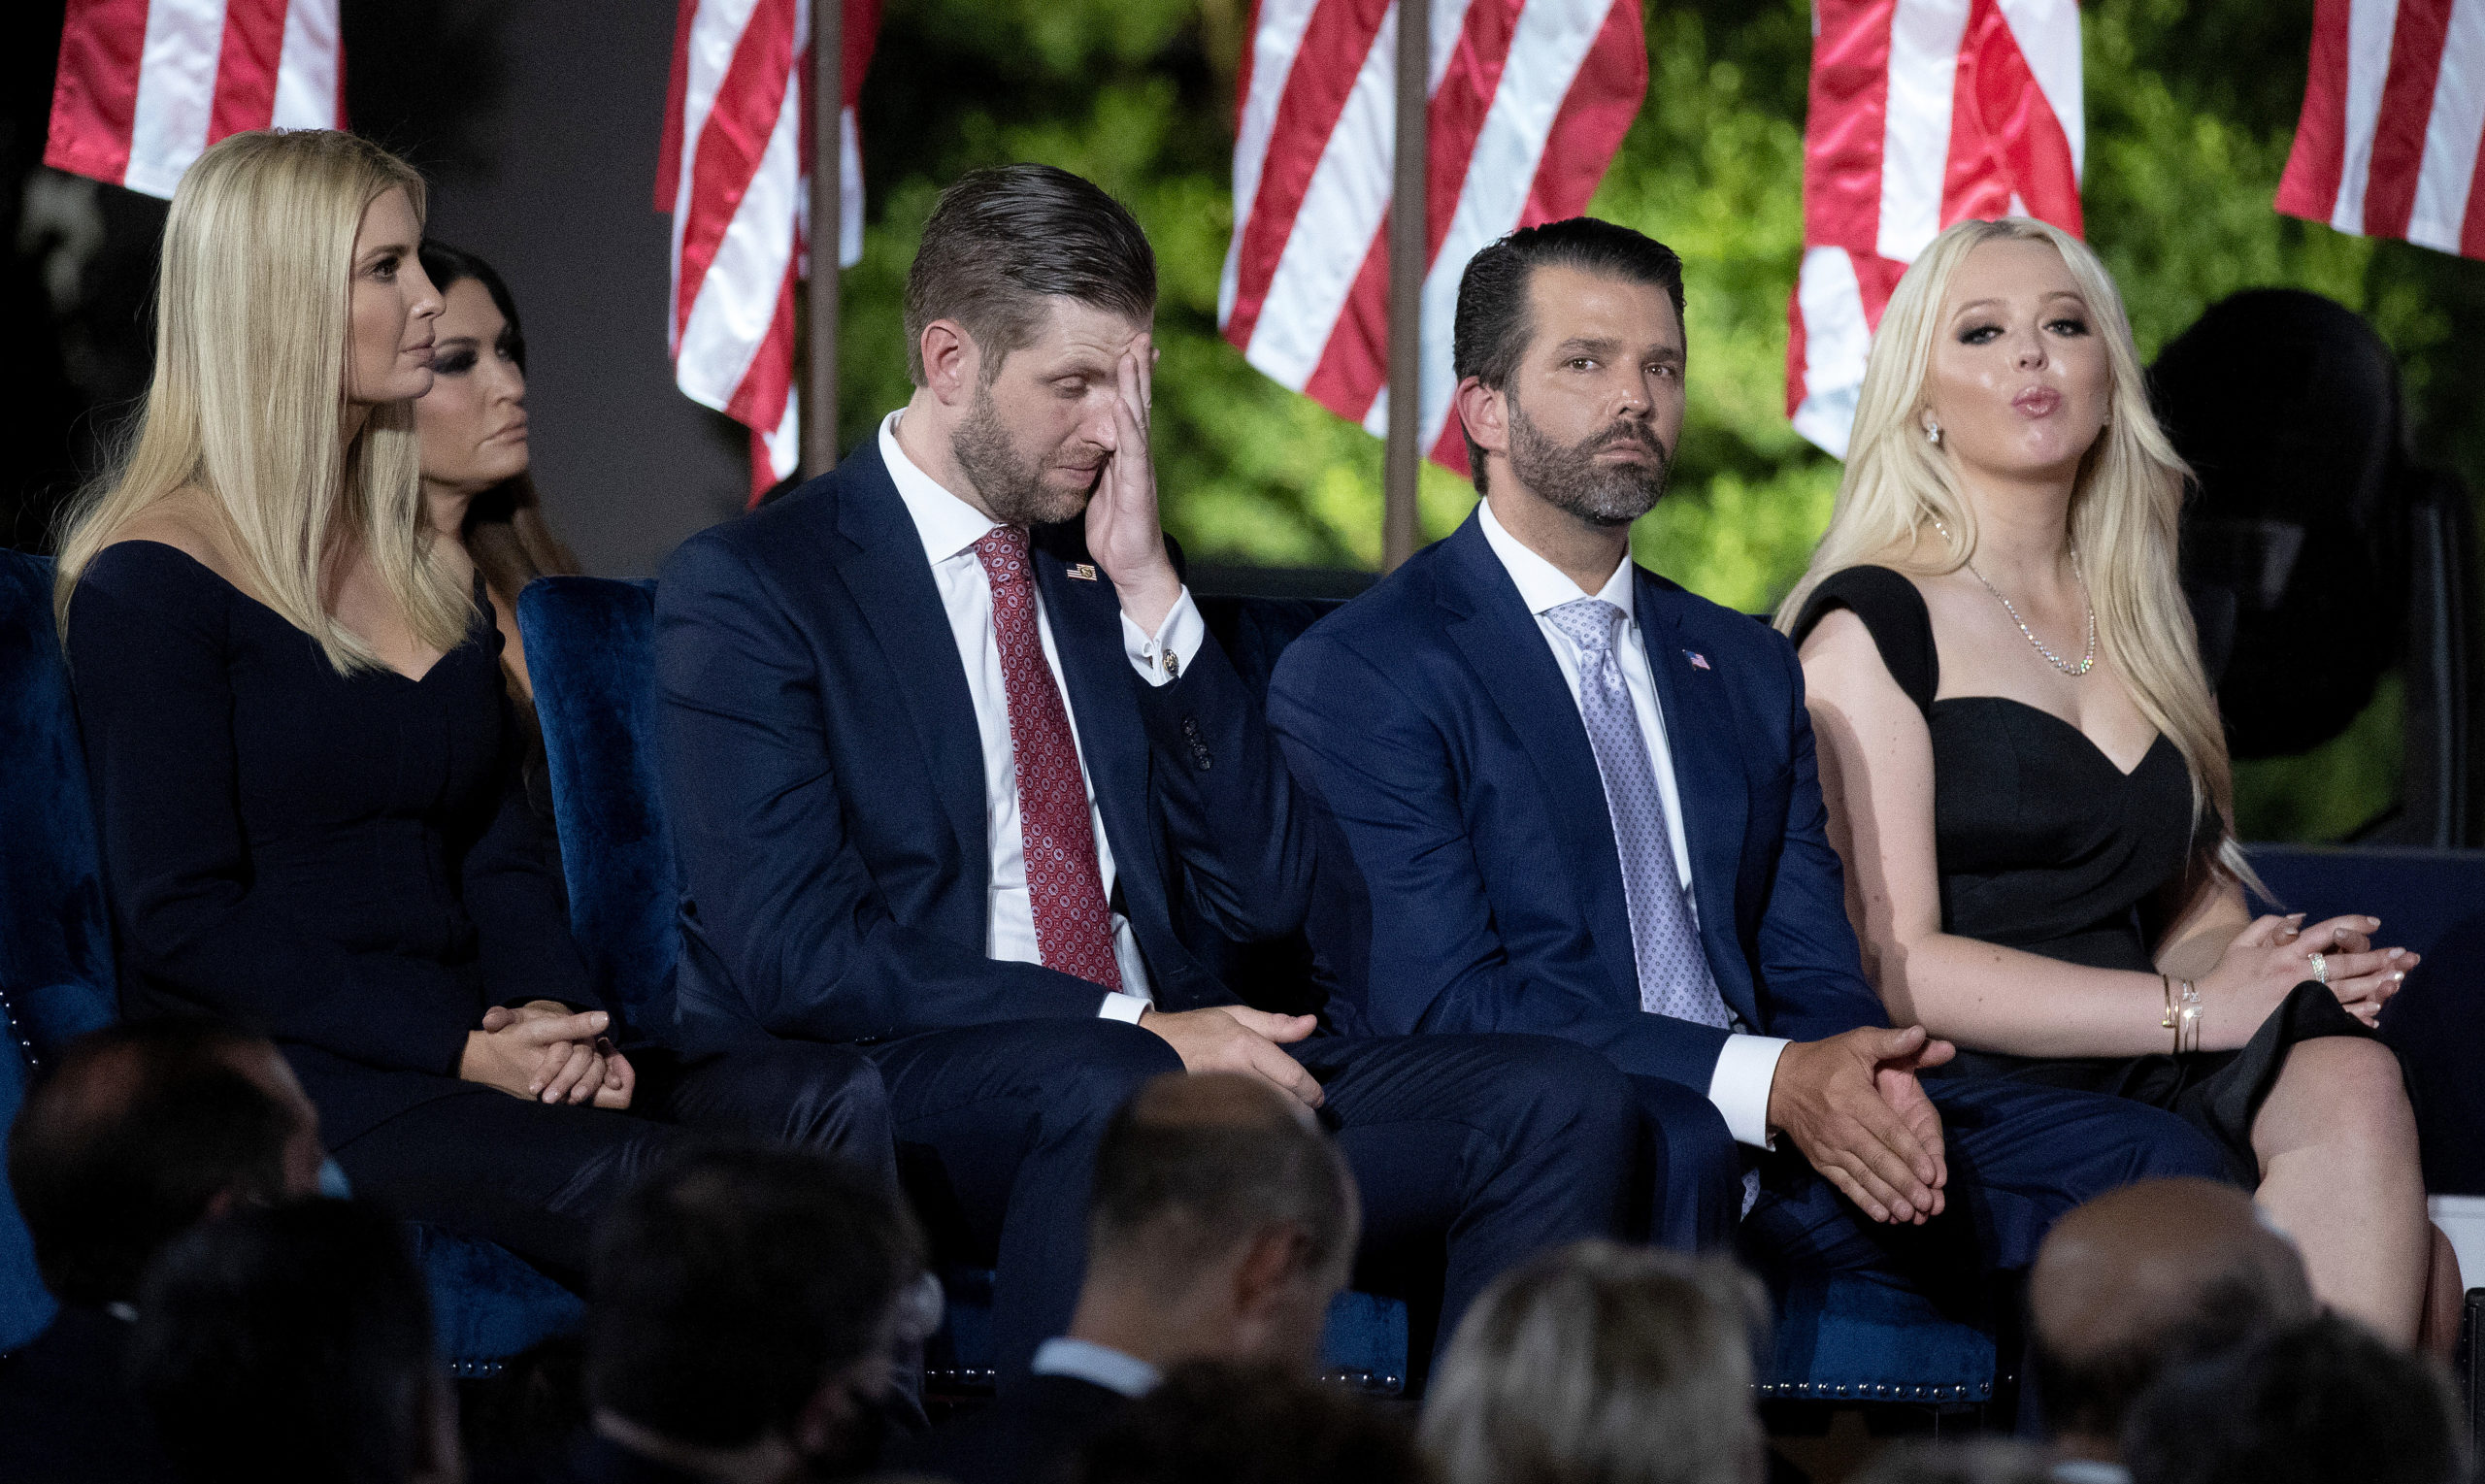 WASHINGTON, DC - AUGUST 27: U.S. President Donald Trump's children, (L-R) Ivanka Trump, Eric Trump, Donald Trump Jr. and Tiffany Trump, sit on the stage as their father delivers his 70-minute acceptance speech for the Republican presidential nomination on the South Lawn of the White House August 27, 2020 in Washington, DC. Trump gave the speech in front of 1500 invited guests. (Photo by Chip Somodevilla/Getty Images)